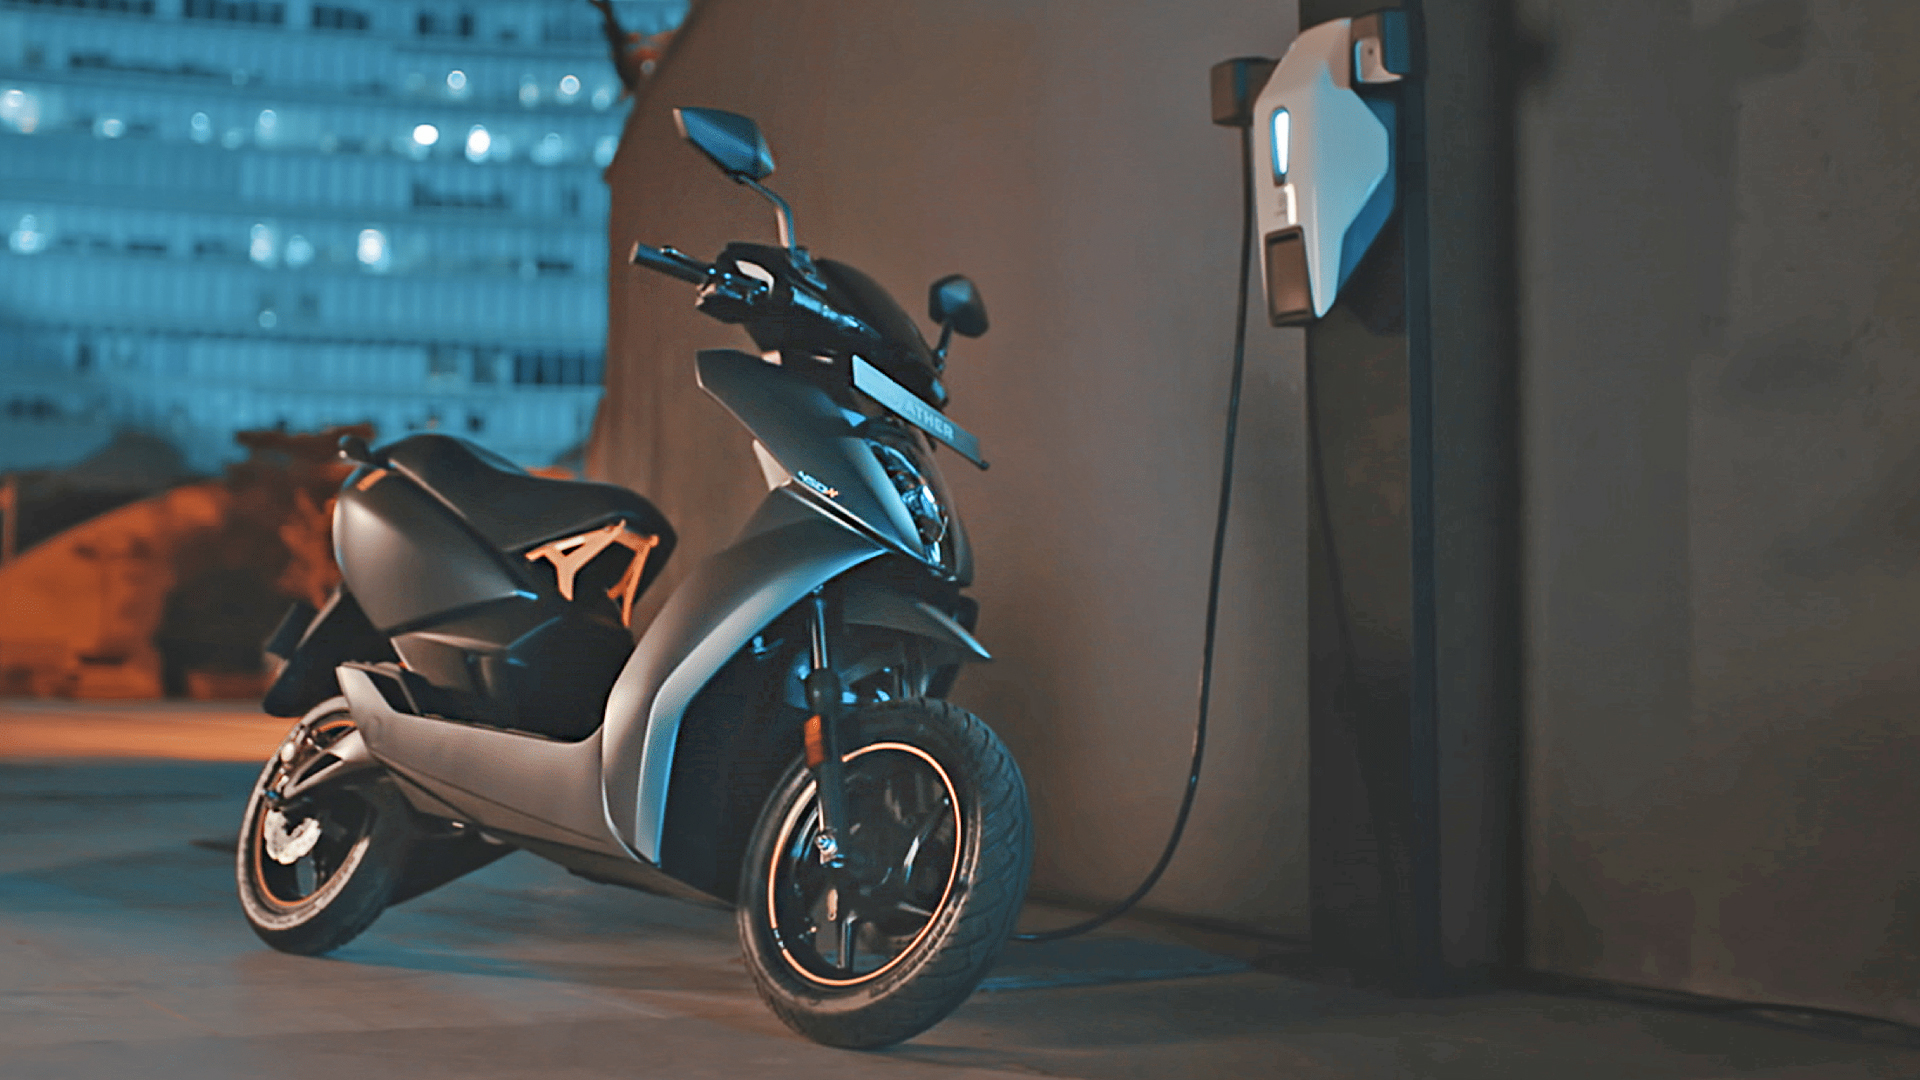 Ather Energy 450X 2020 Price, Mileage, Reviews, Specification